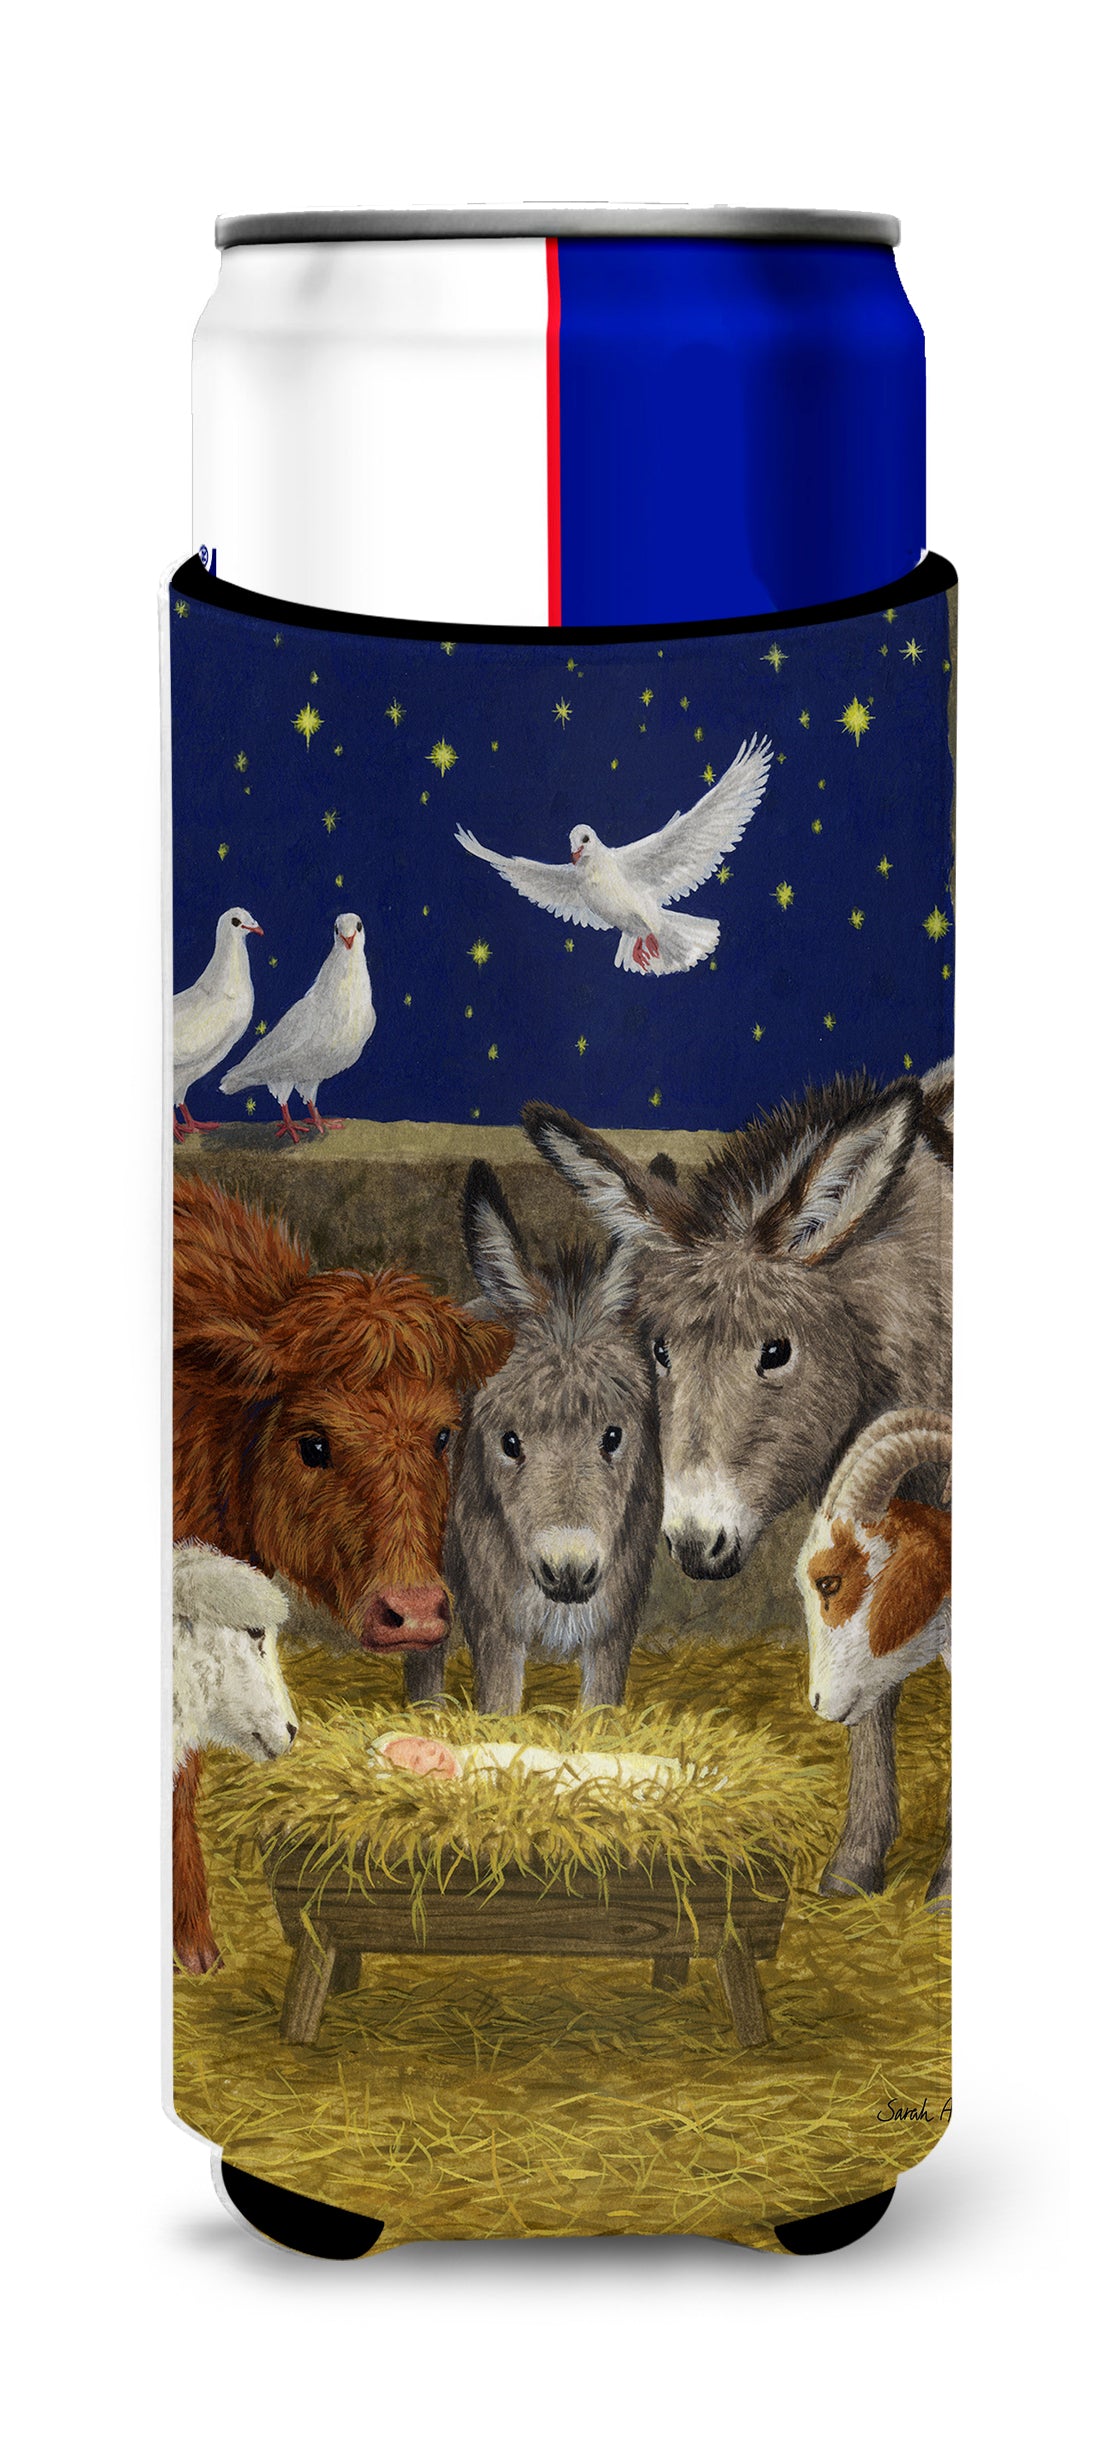 Nativity Scene with just animals Ultra Beverage Insulators for slim cans ASA2143MUK